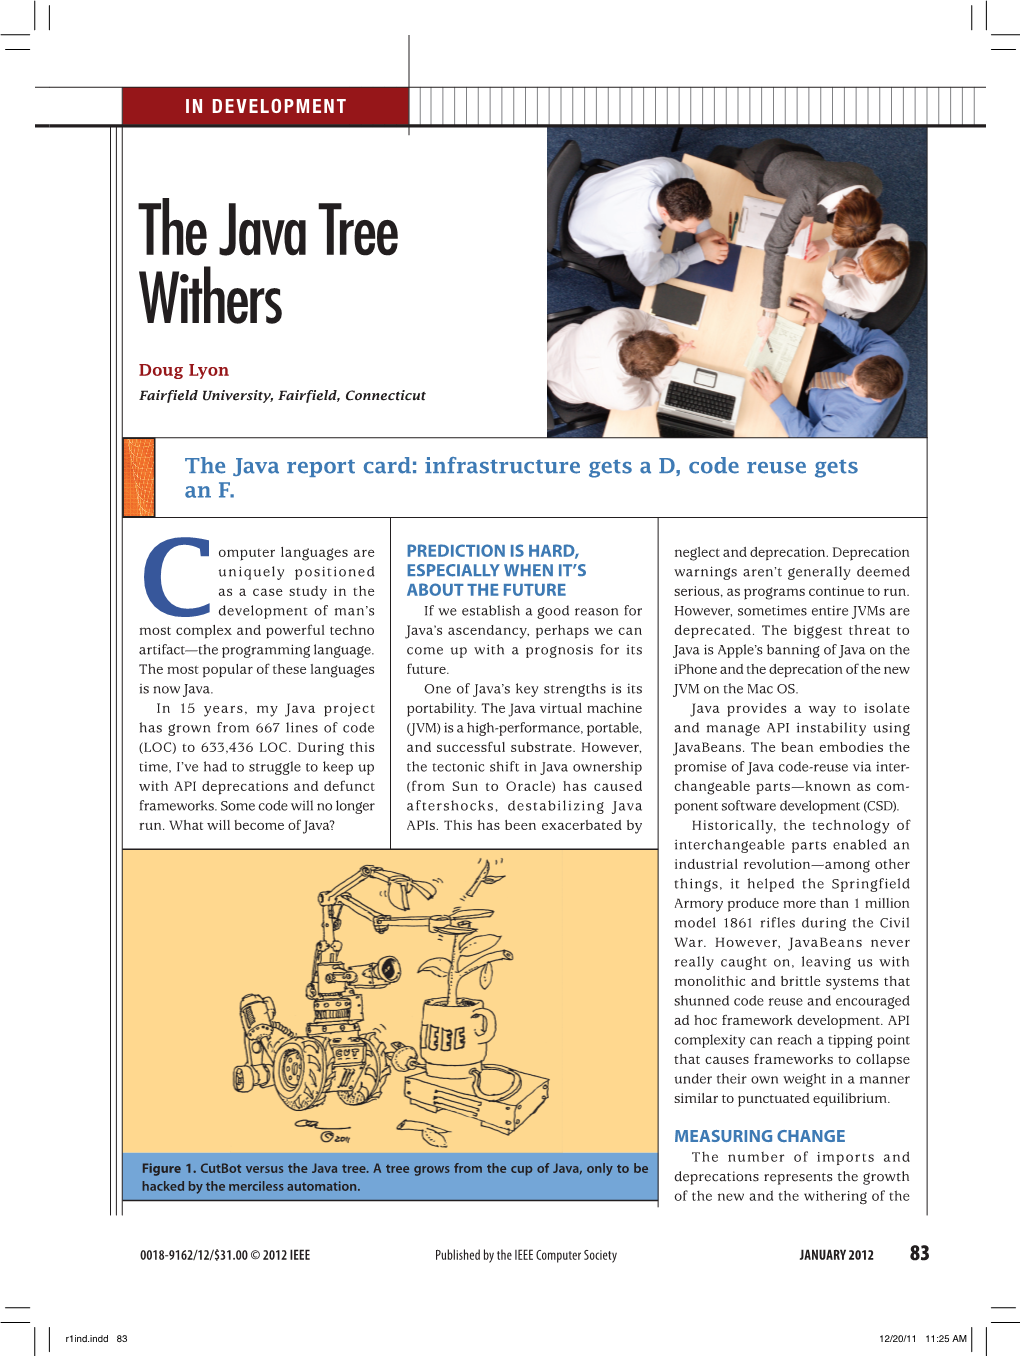 The Java Tree Withers